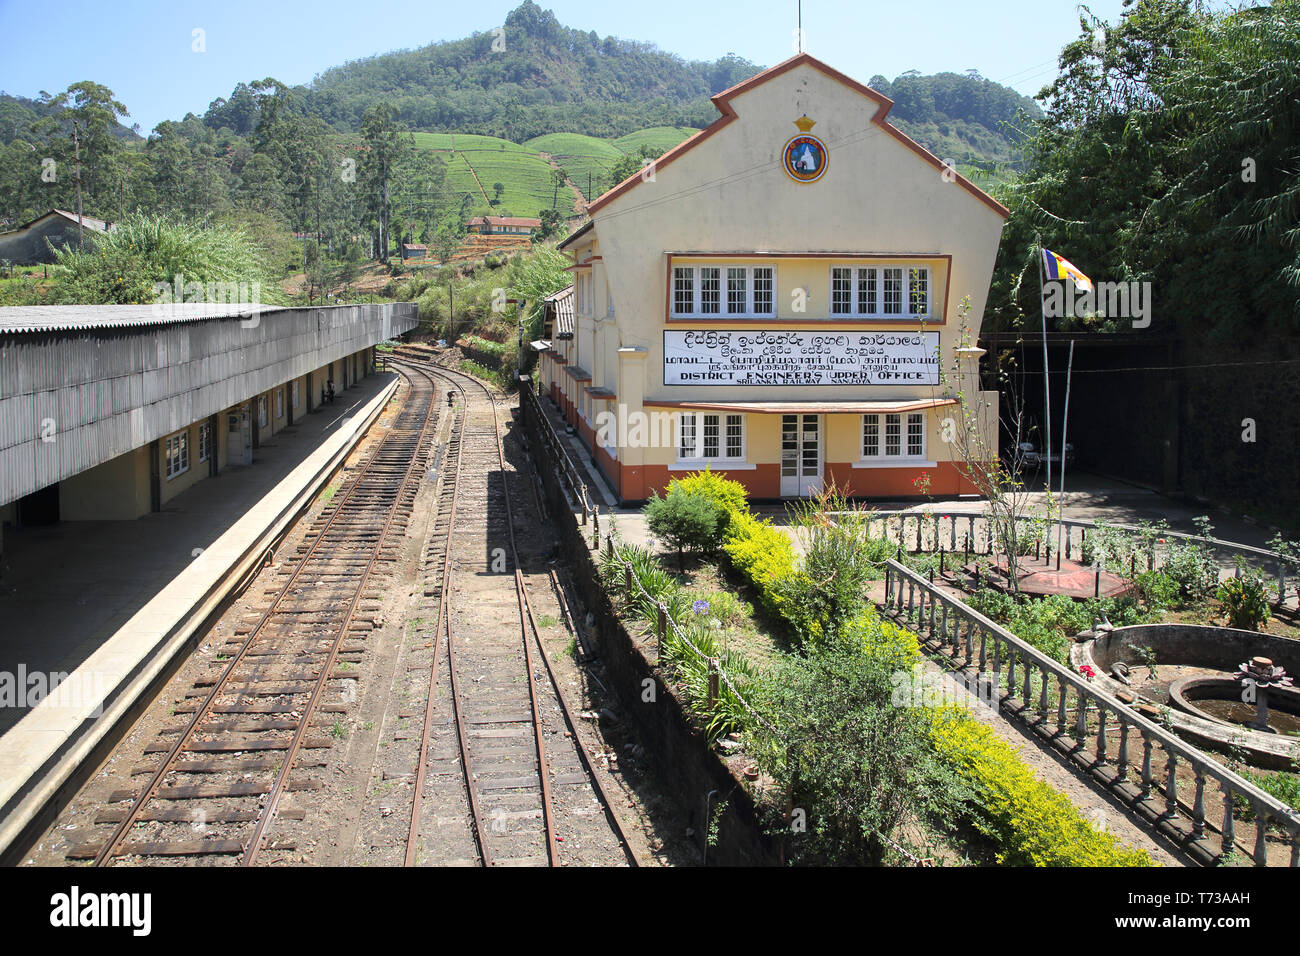 traveling by train through the hill country at nanu-oya station in sri lanka Stock Photo